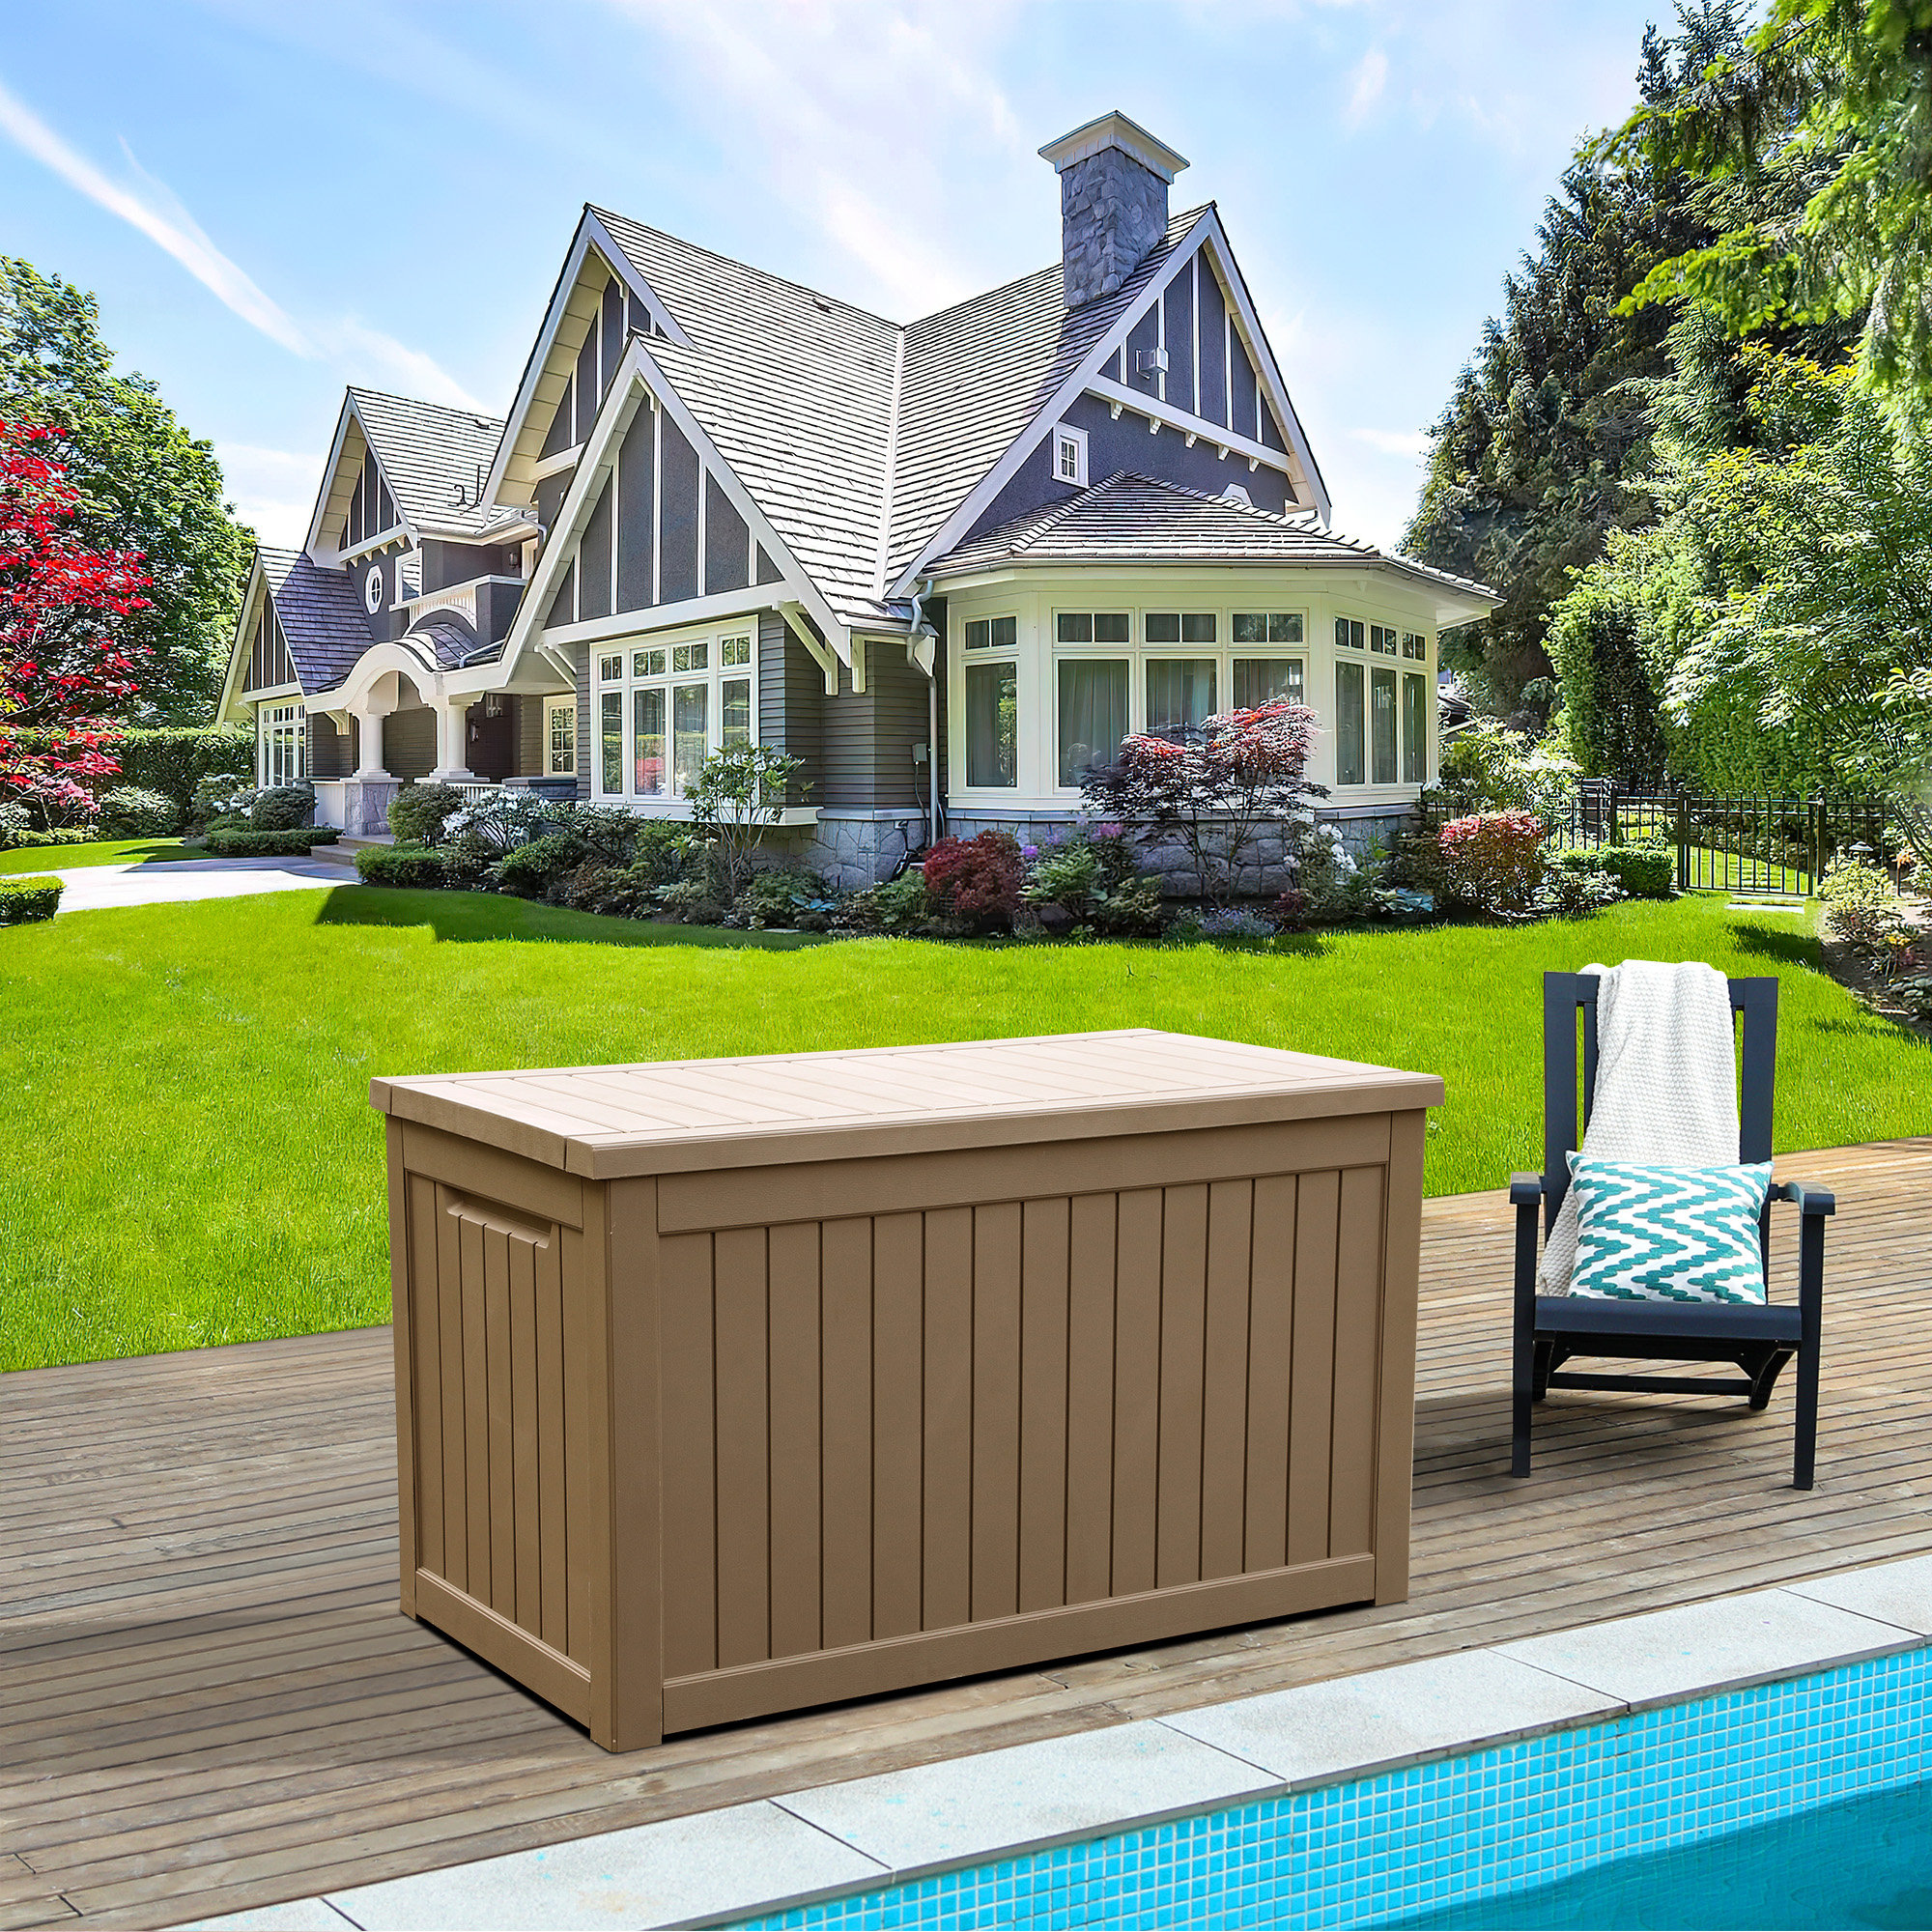 YITAHOME 30 Gallon Deck Box Outdoor Storage Box, Waterproof Resin Package  Delivery and Storage Box with Lockable Lid for Patio Furniture Cushions